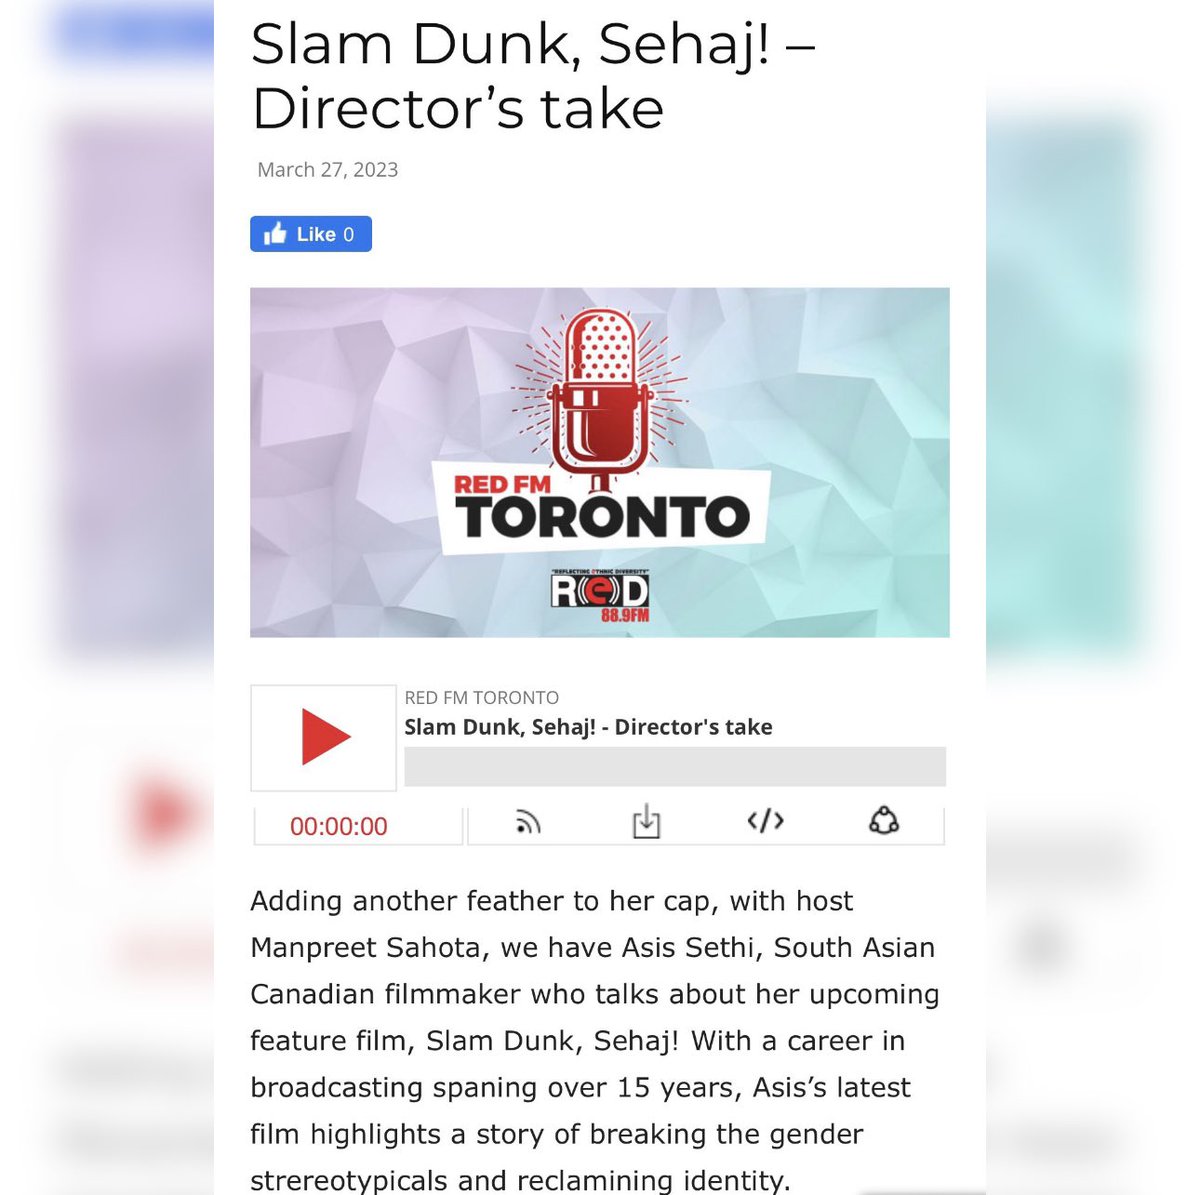 In the News: Check out @asissethi’s radio interview with @REDFMToronto where she spoke about all things #SlamDunkSehaj! 

Click here: toronto.redfm.ca/slam-dunk-seha…